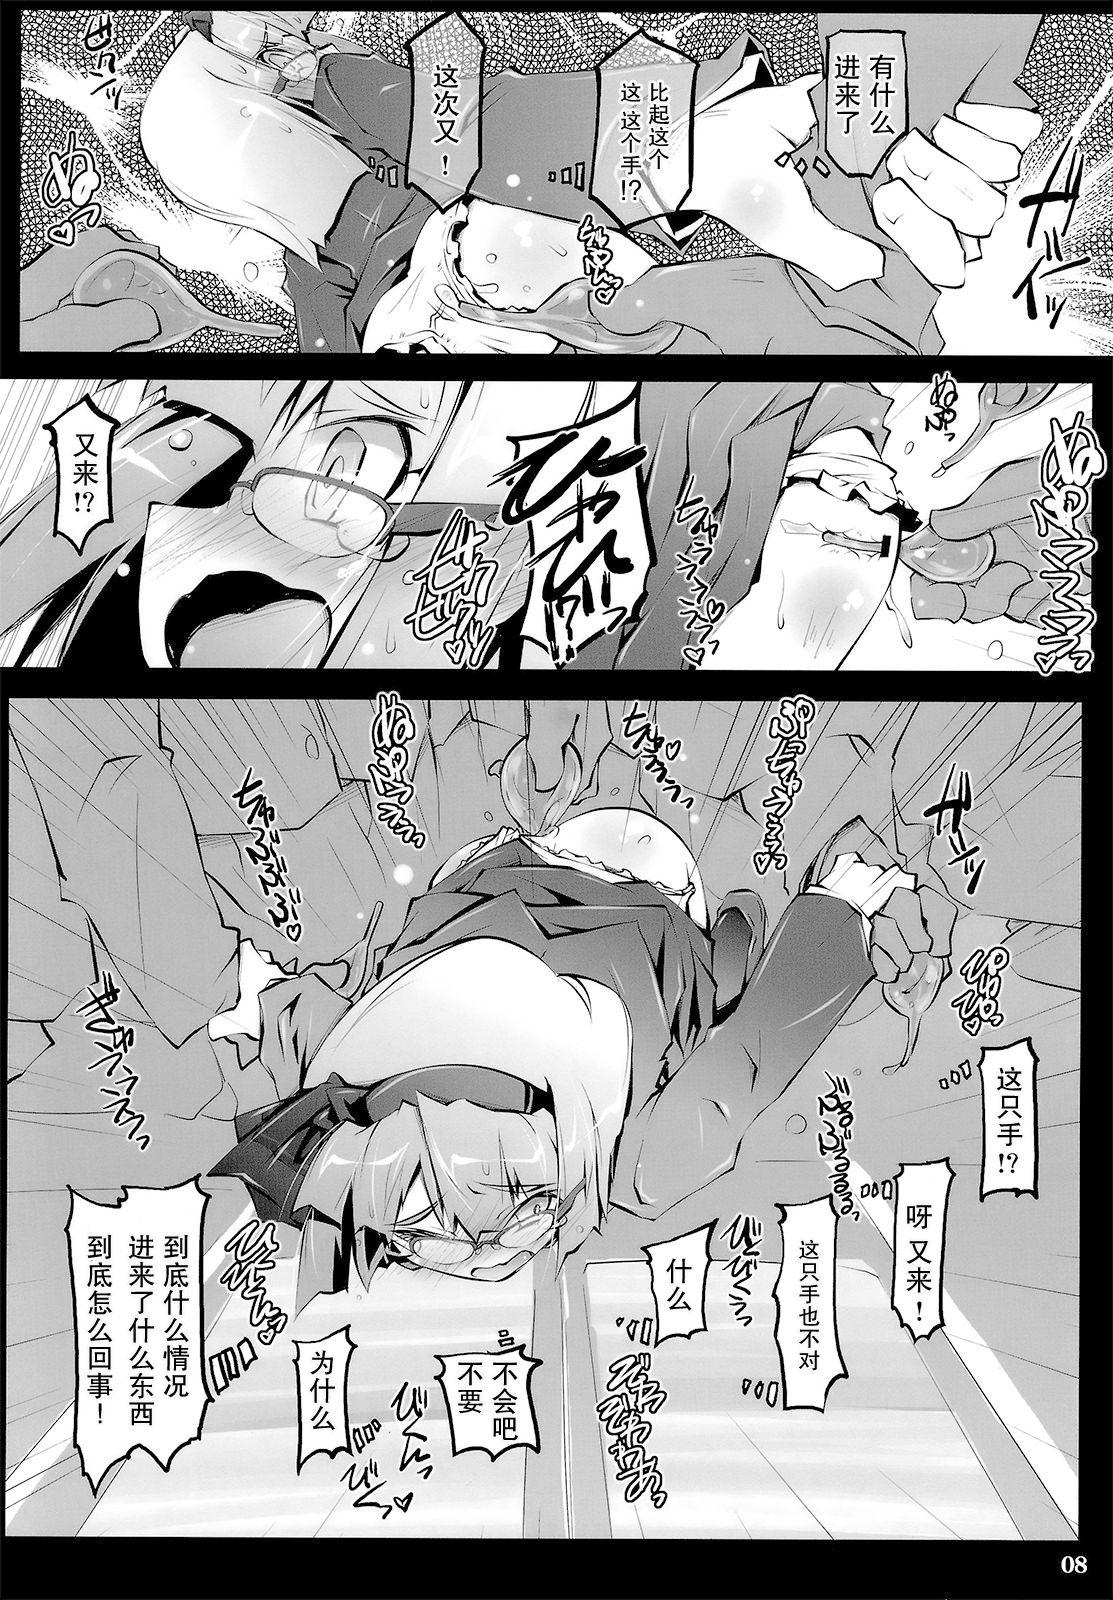 Dom PANIC TRAIN - Touhou project Threesome - Page 7